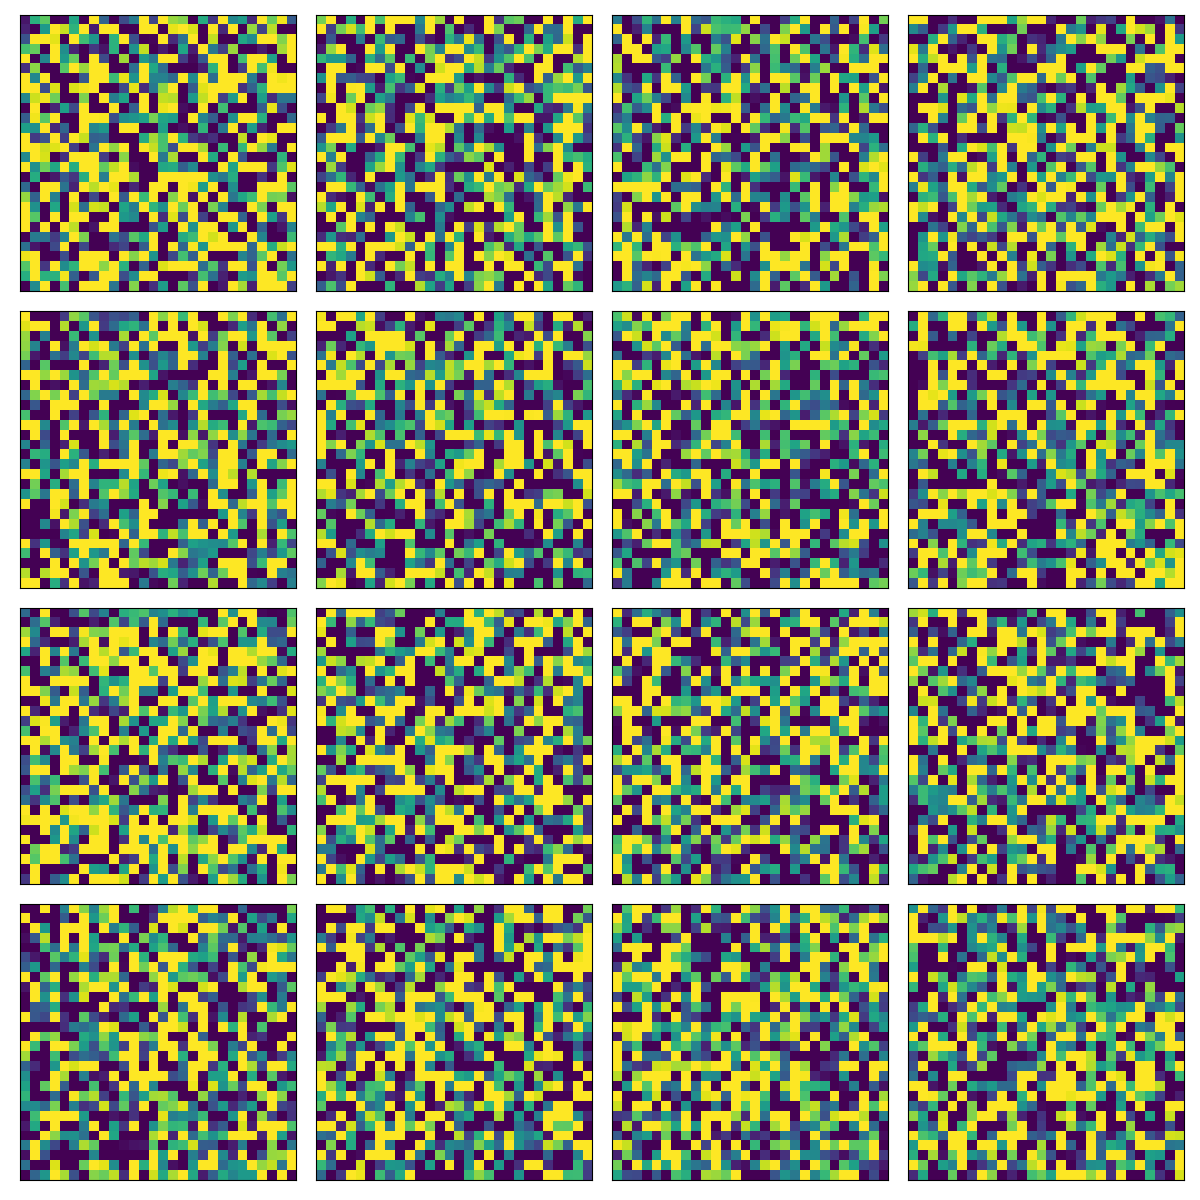 sampled-mnist-pixels-from-trained-model